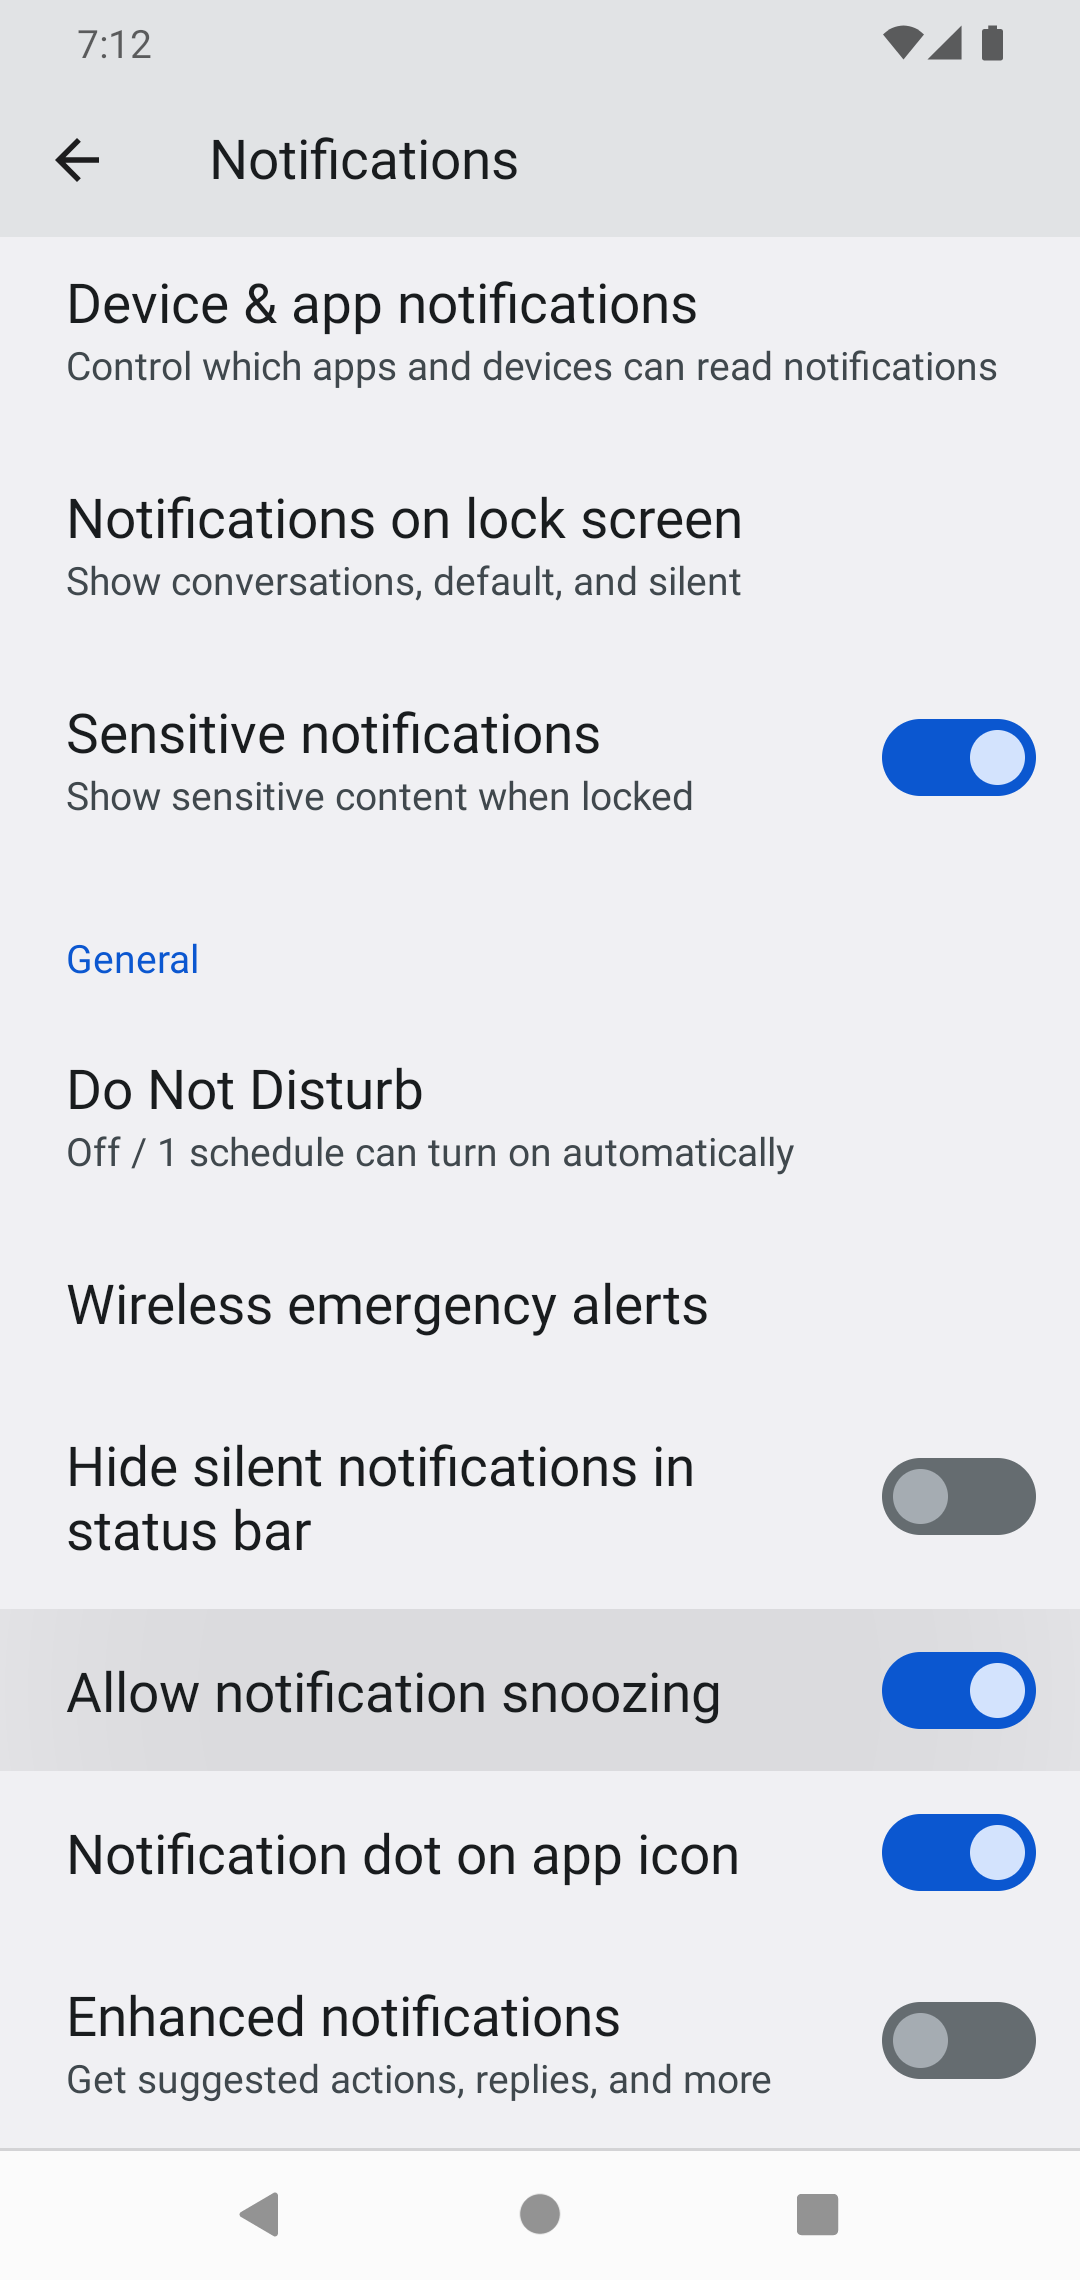 Option to allow notification snoozing on Android phone.